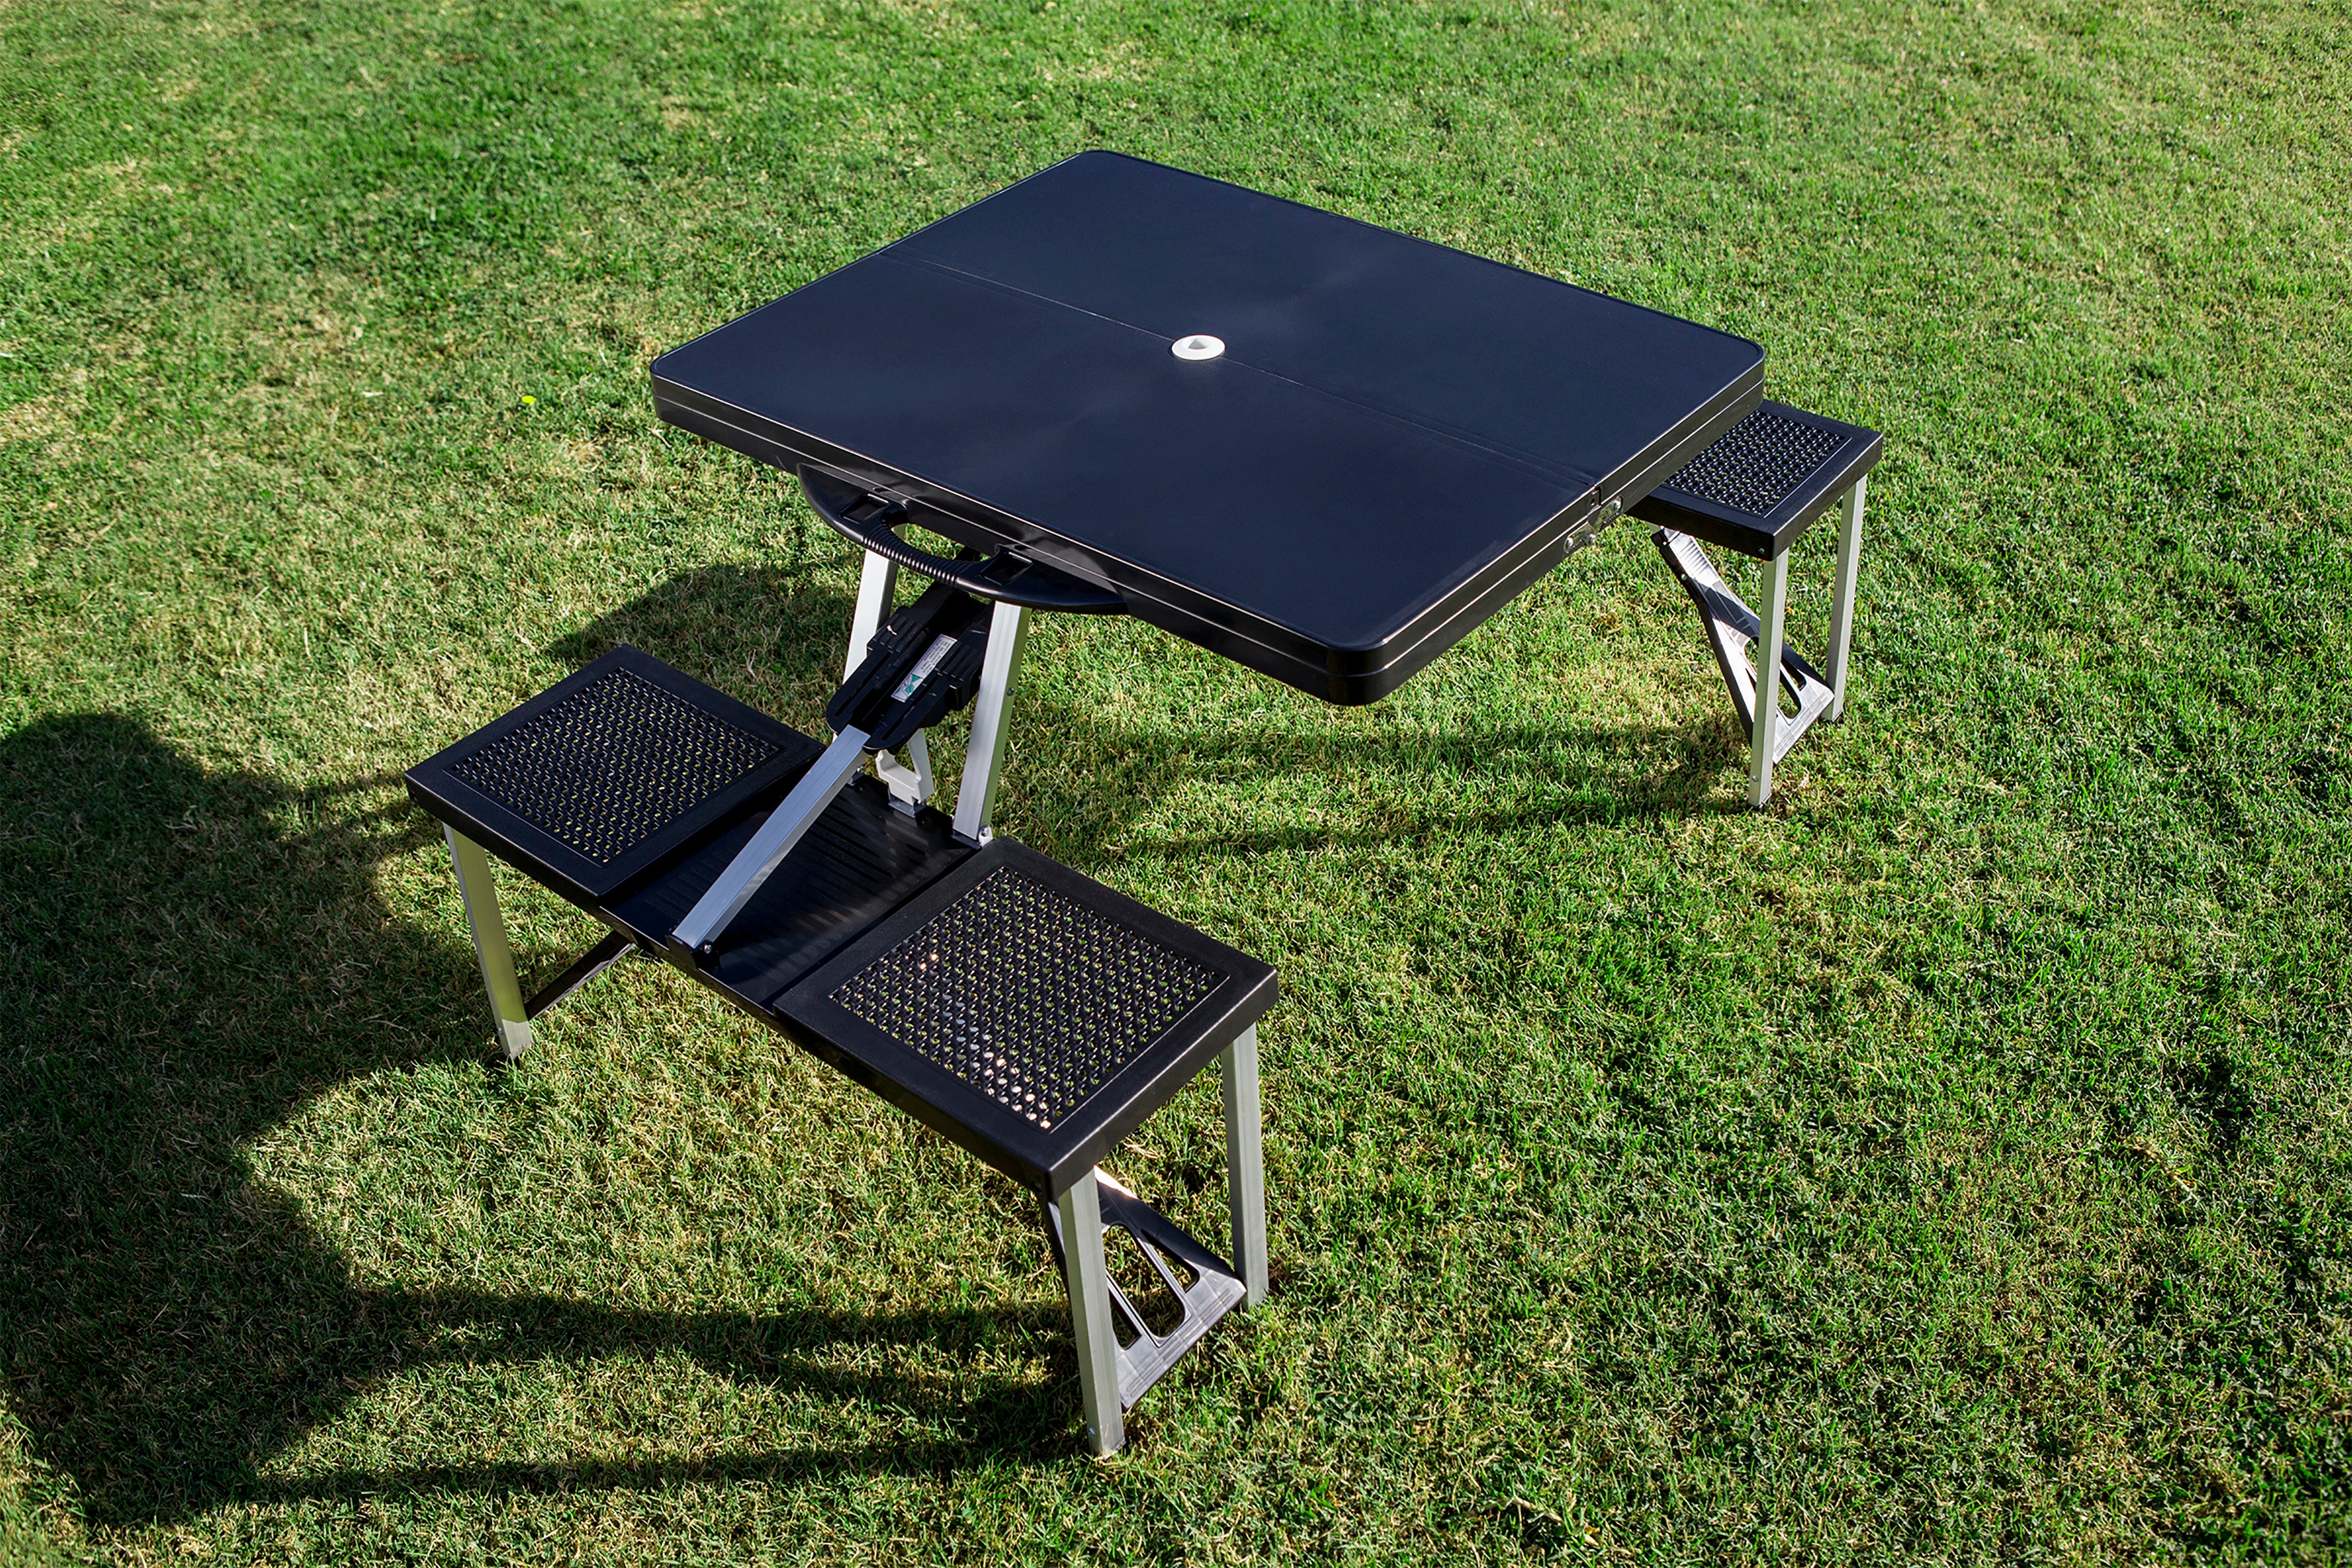 Boise State Broncos Football Field - Picnic Table Portable Folding Table with Seats